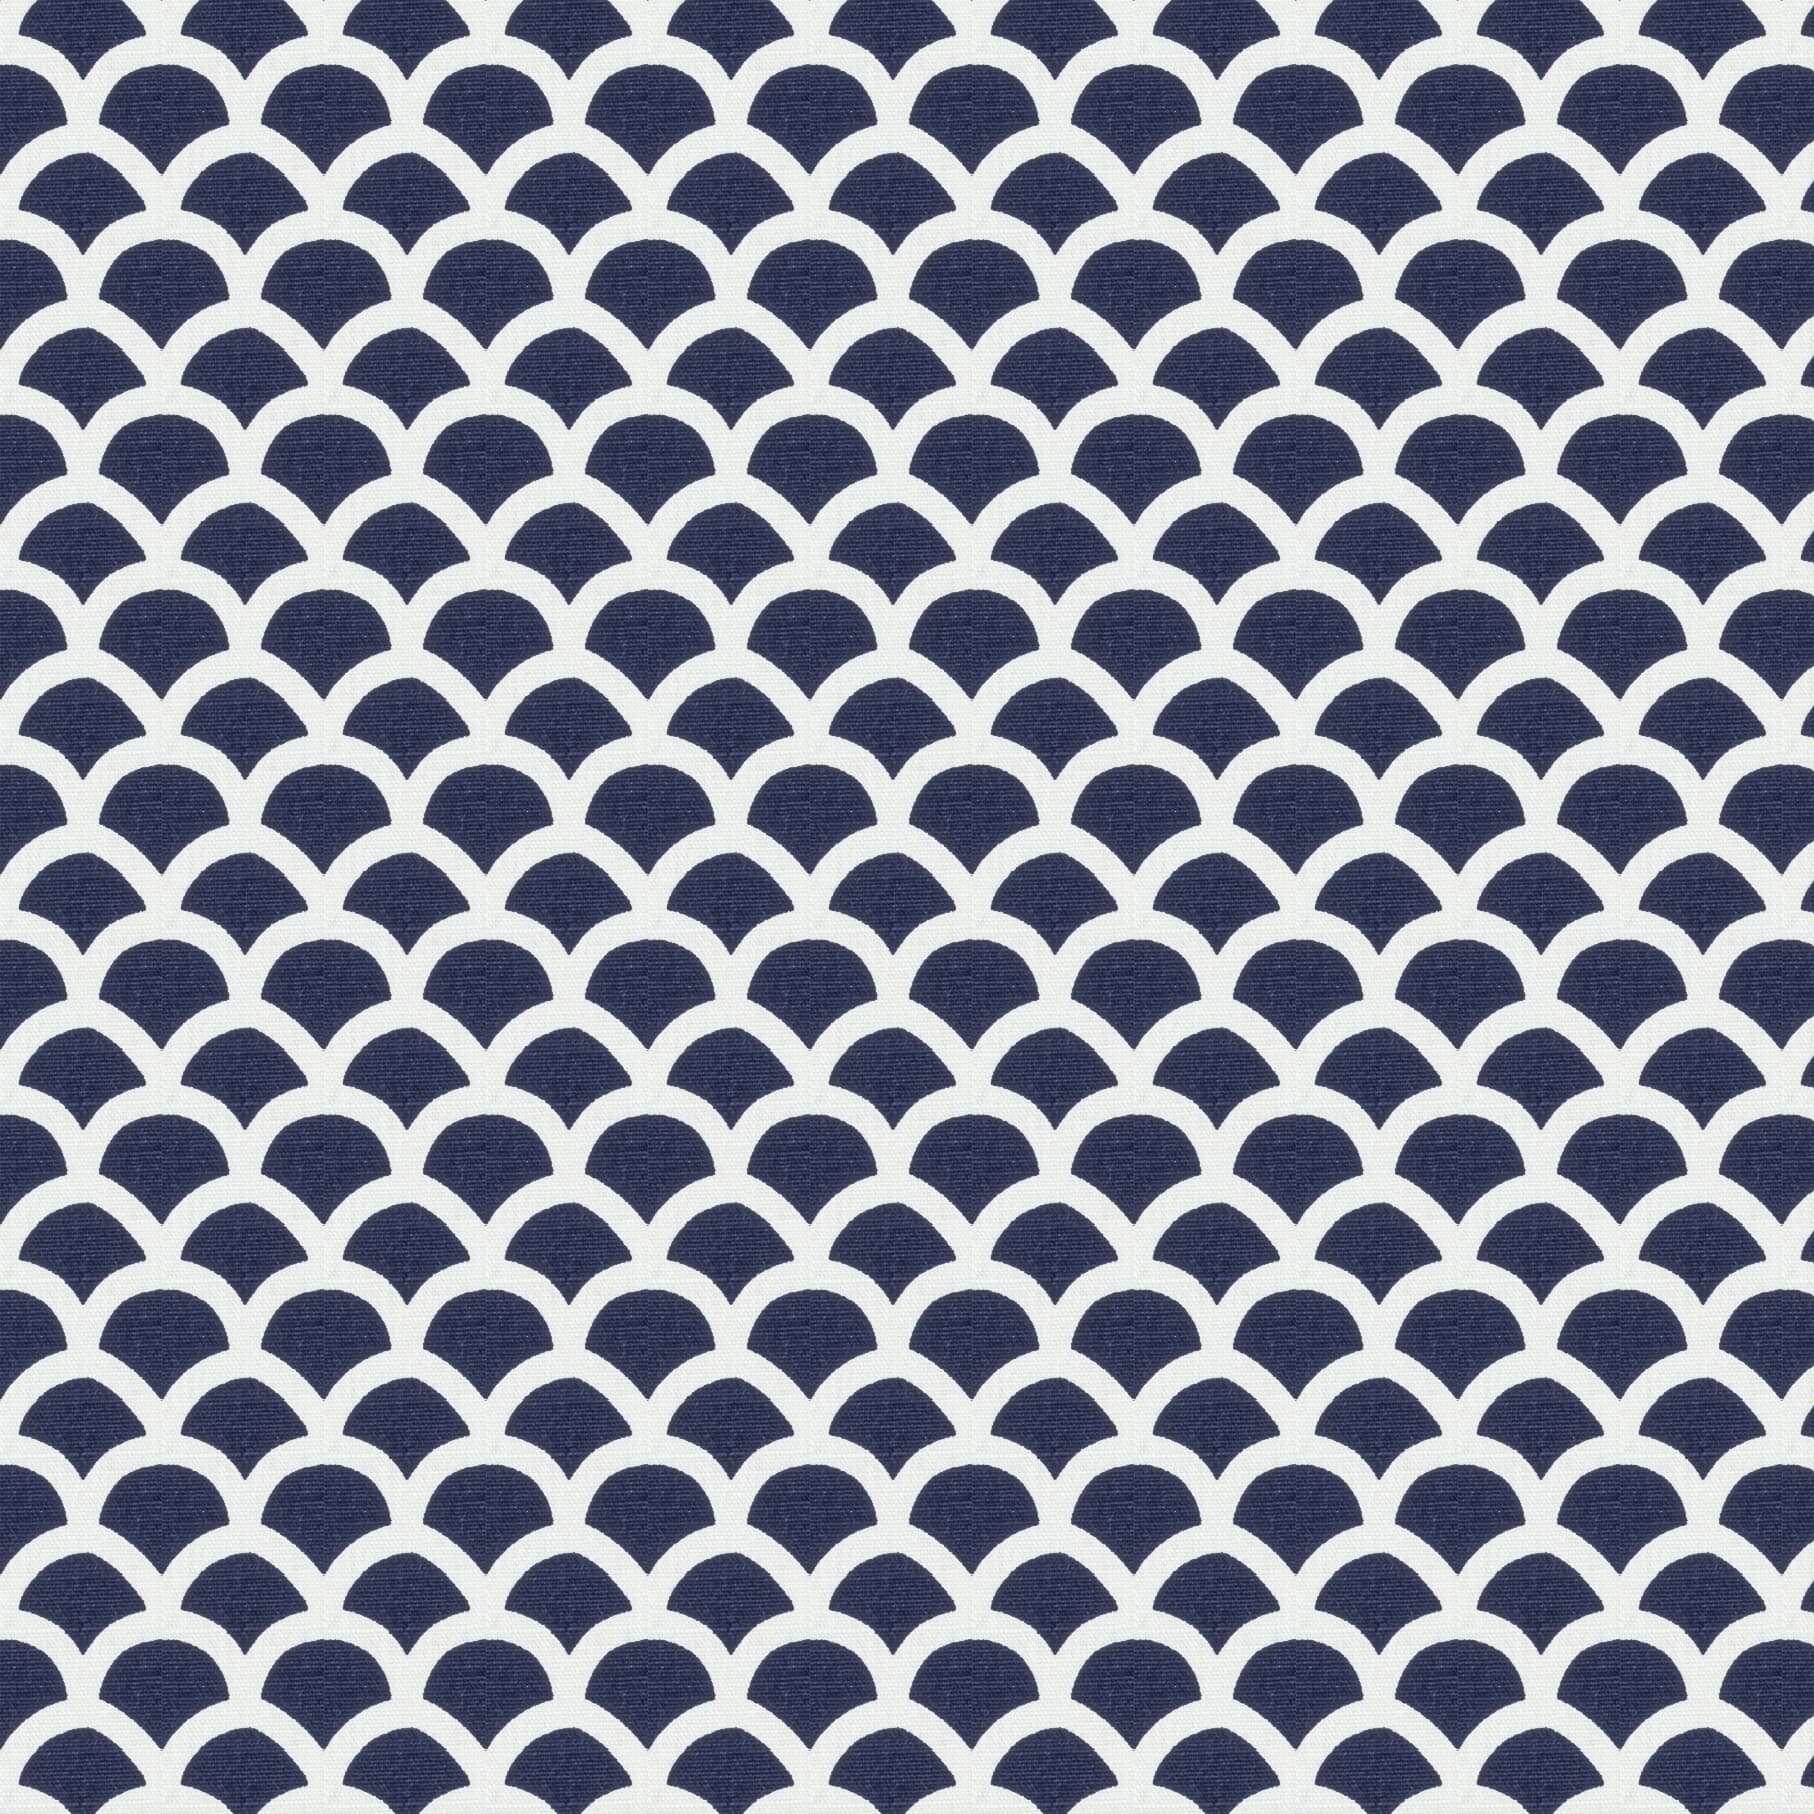 7827-3 St Barths Gate Navy by Stout Fabric